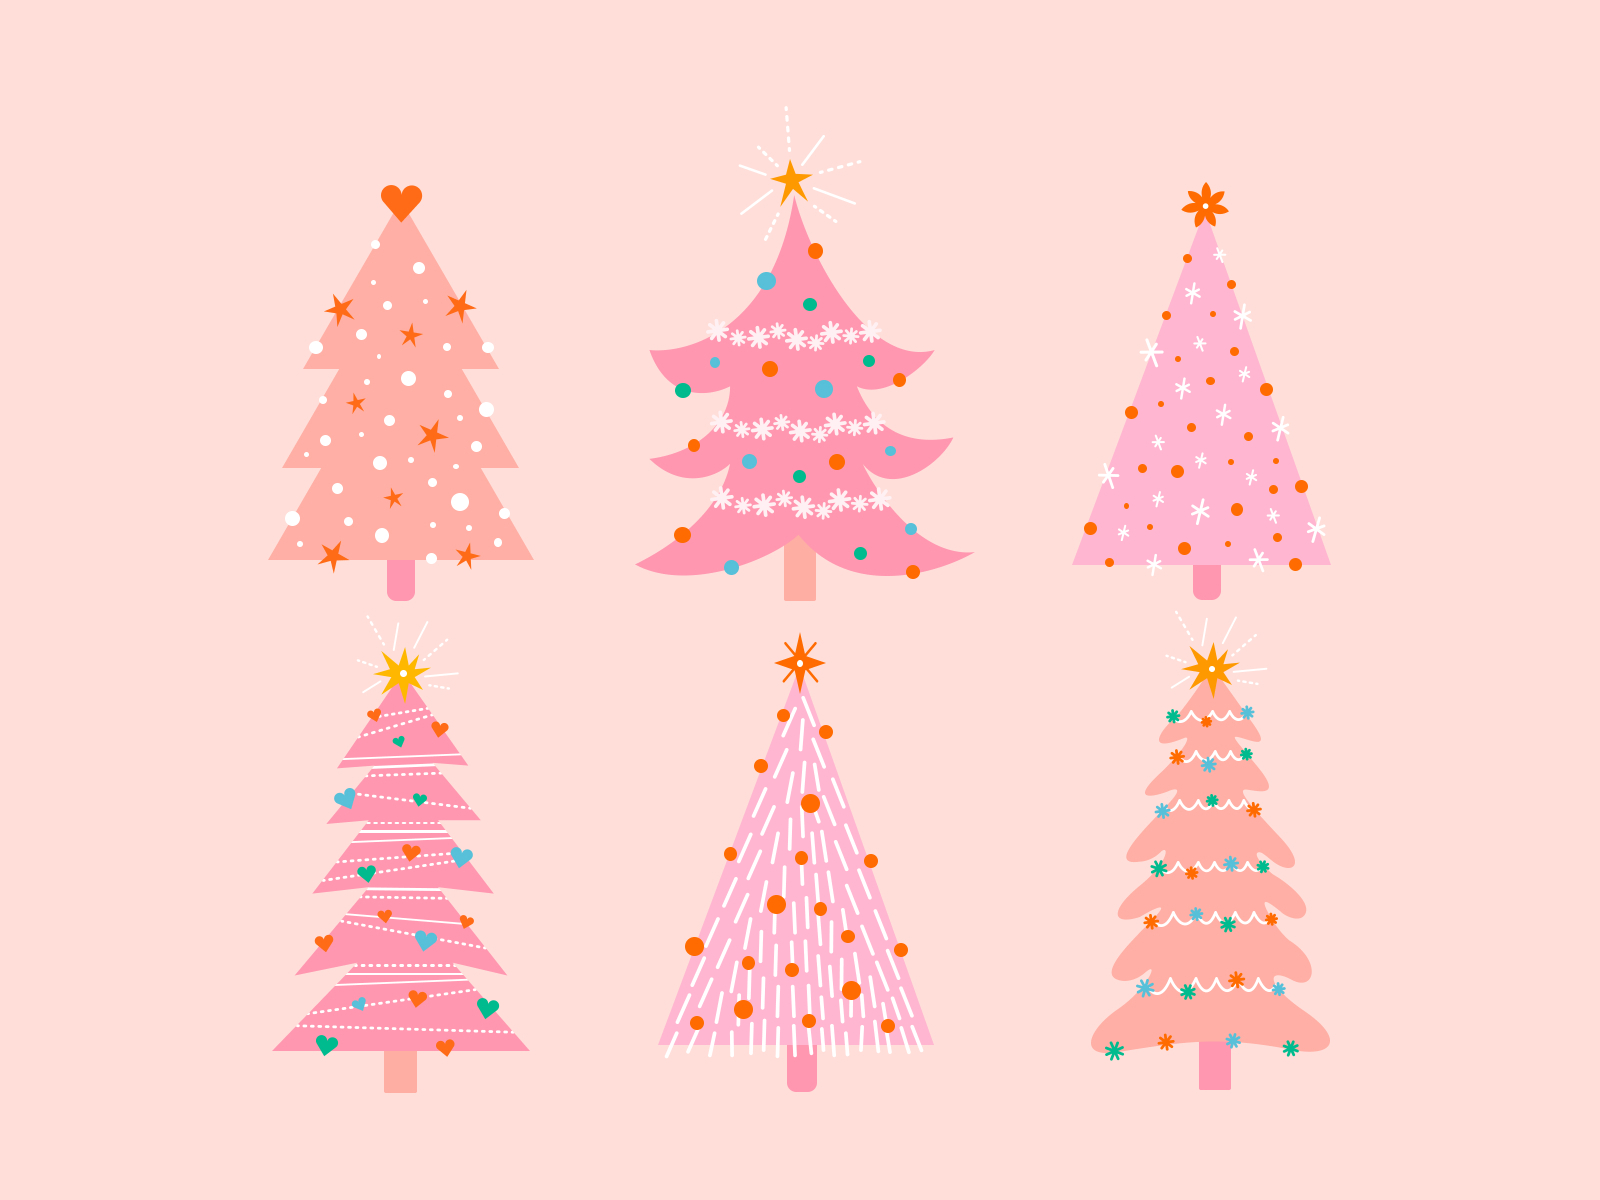 Download A pink and festive Christmas tree to spread holiday cheer  Wallpaper  Wallpaperscom